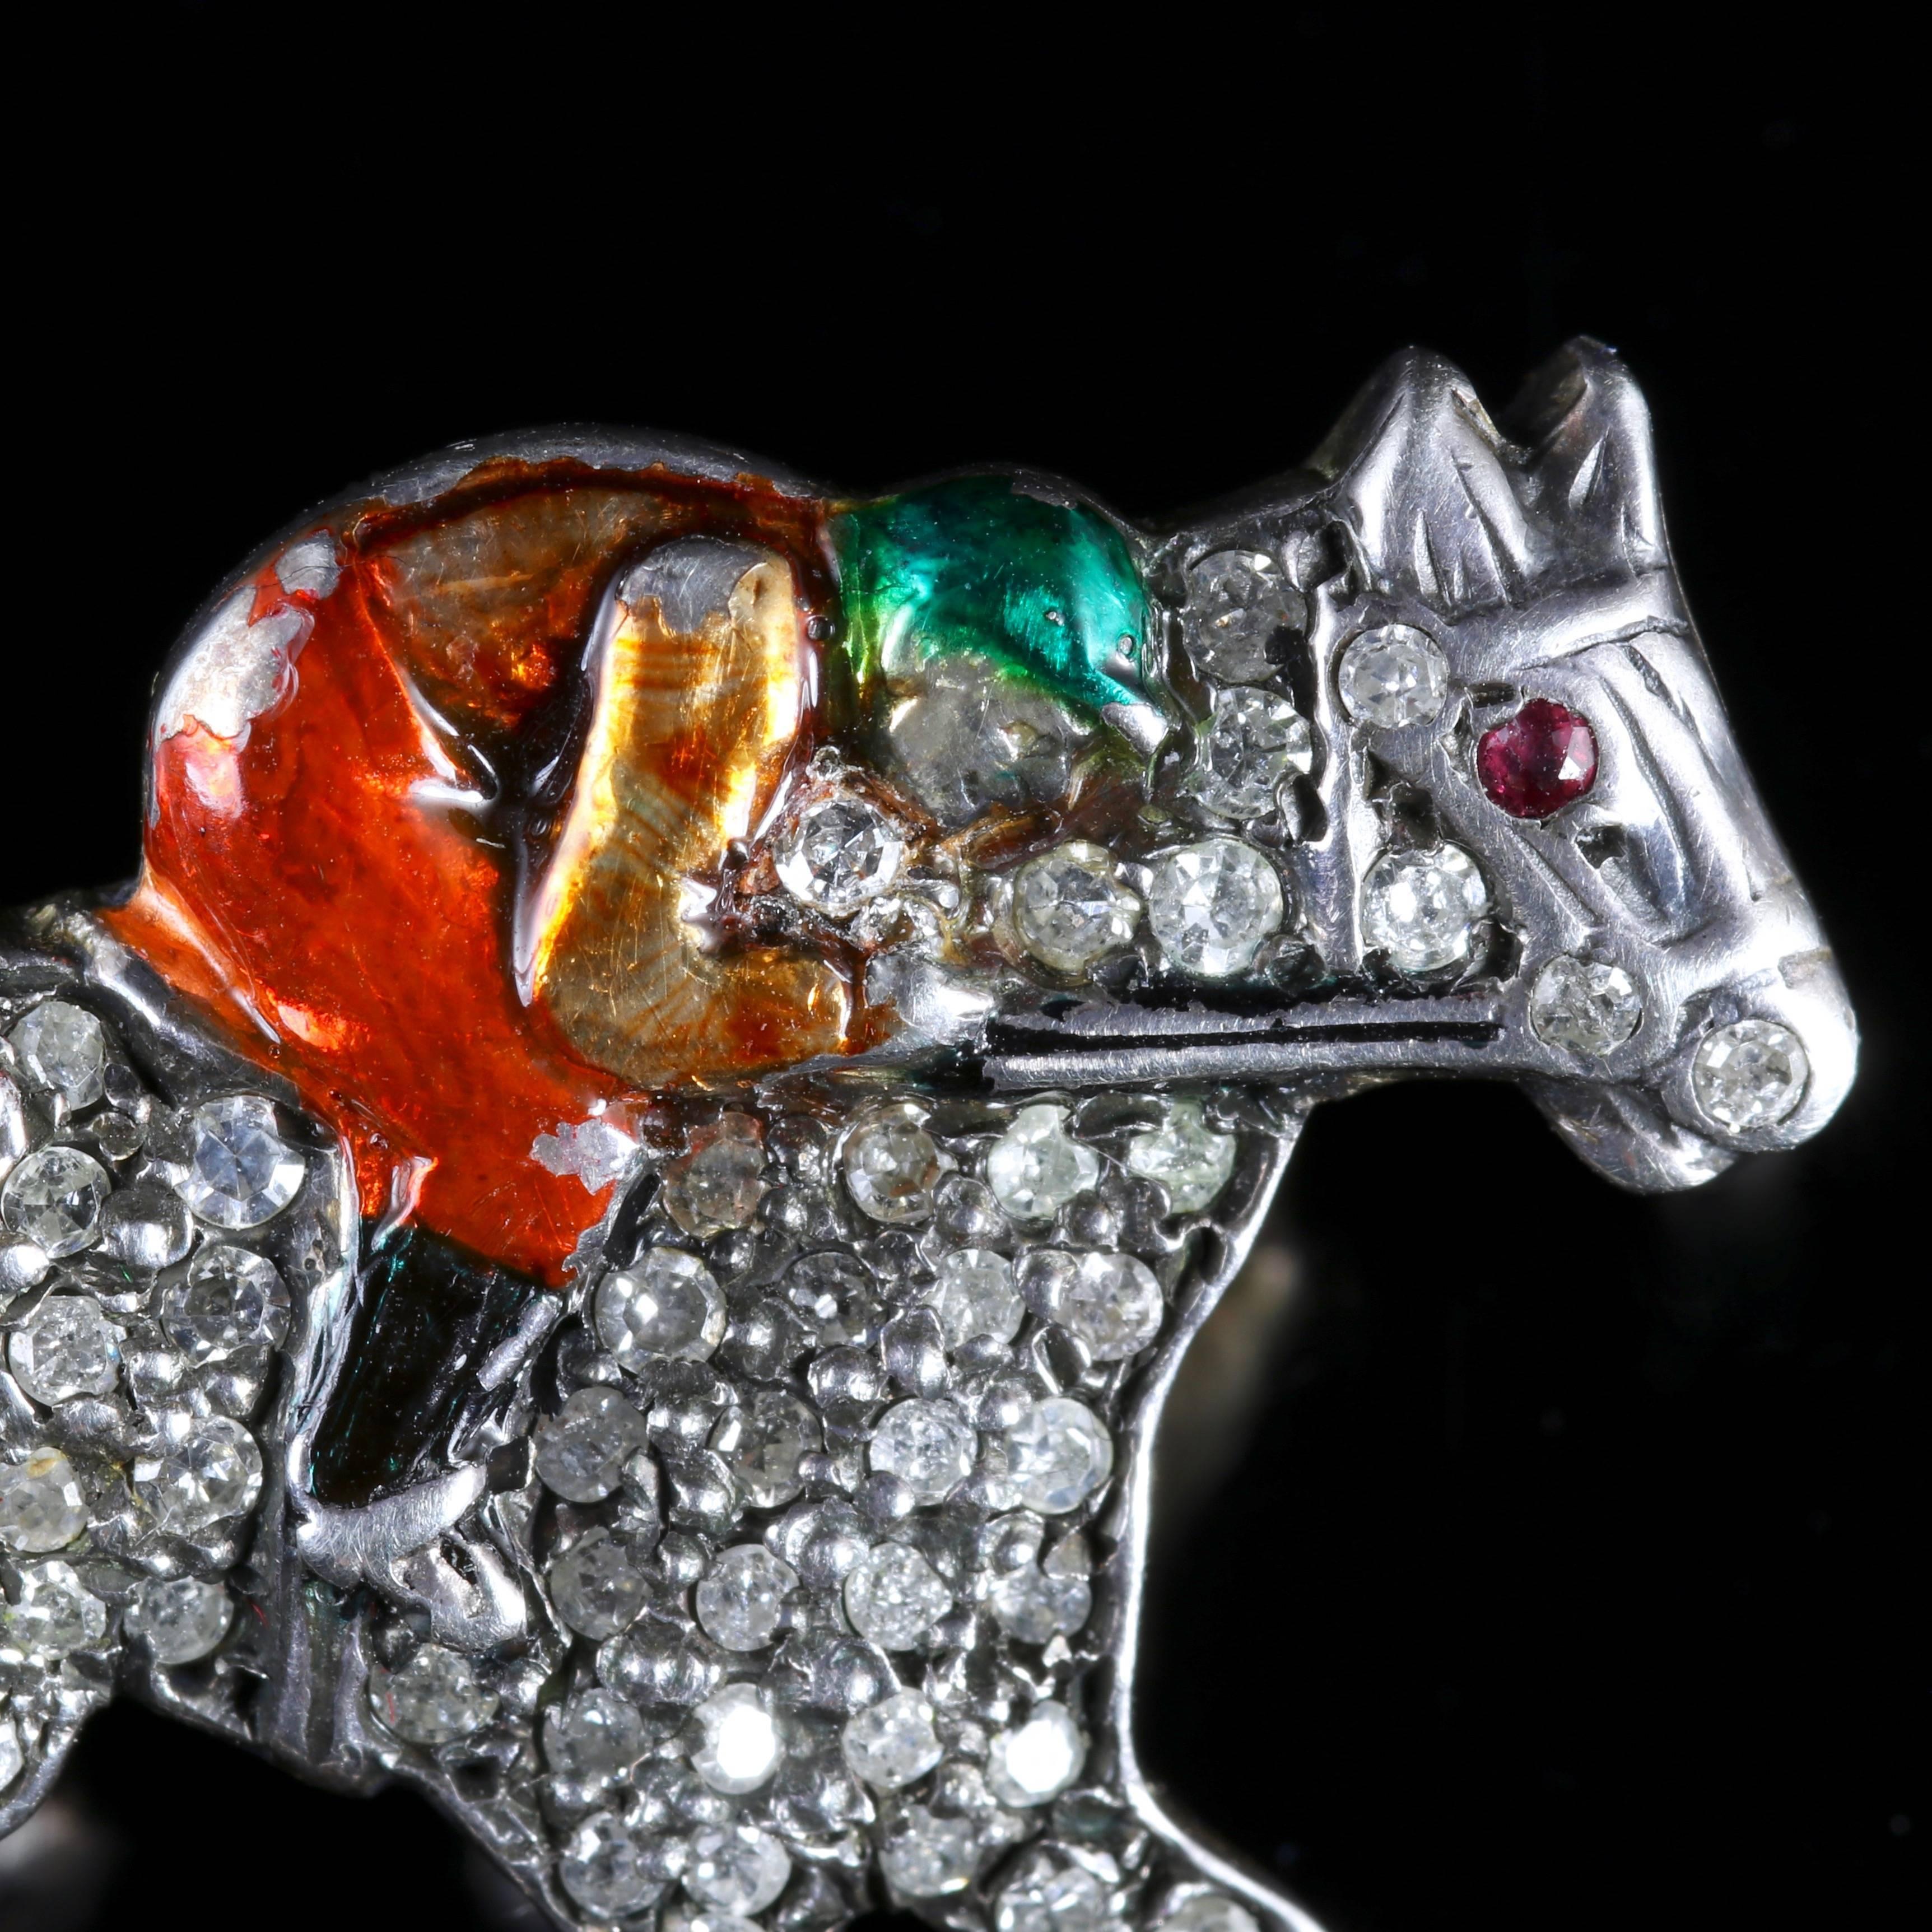 To read more please click continue reading below-

This fabulous antique Victorian brooch is adorned with Diamonds picturing a jockey on a speeding race horse.

Fabulous Enamel detail is displayed on the jockey with his red jodhpurs and green